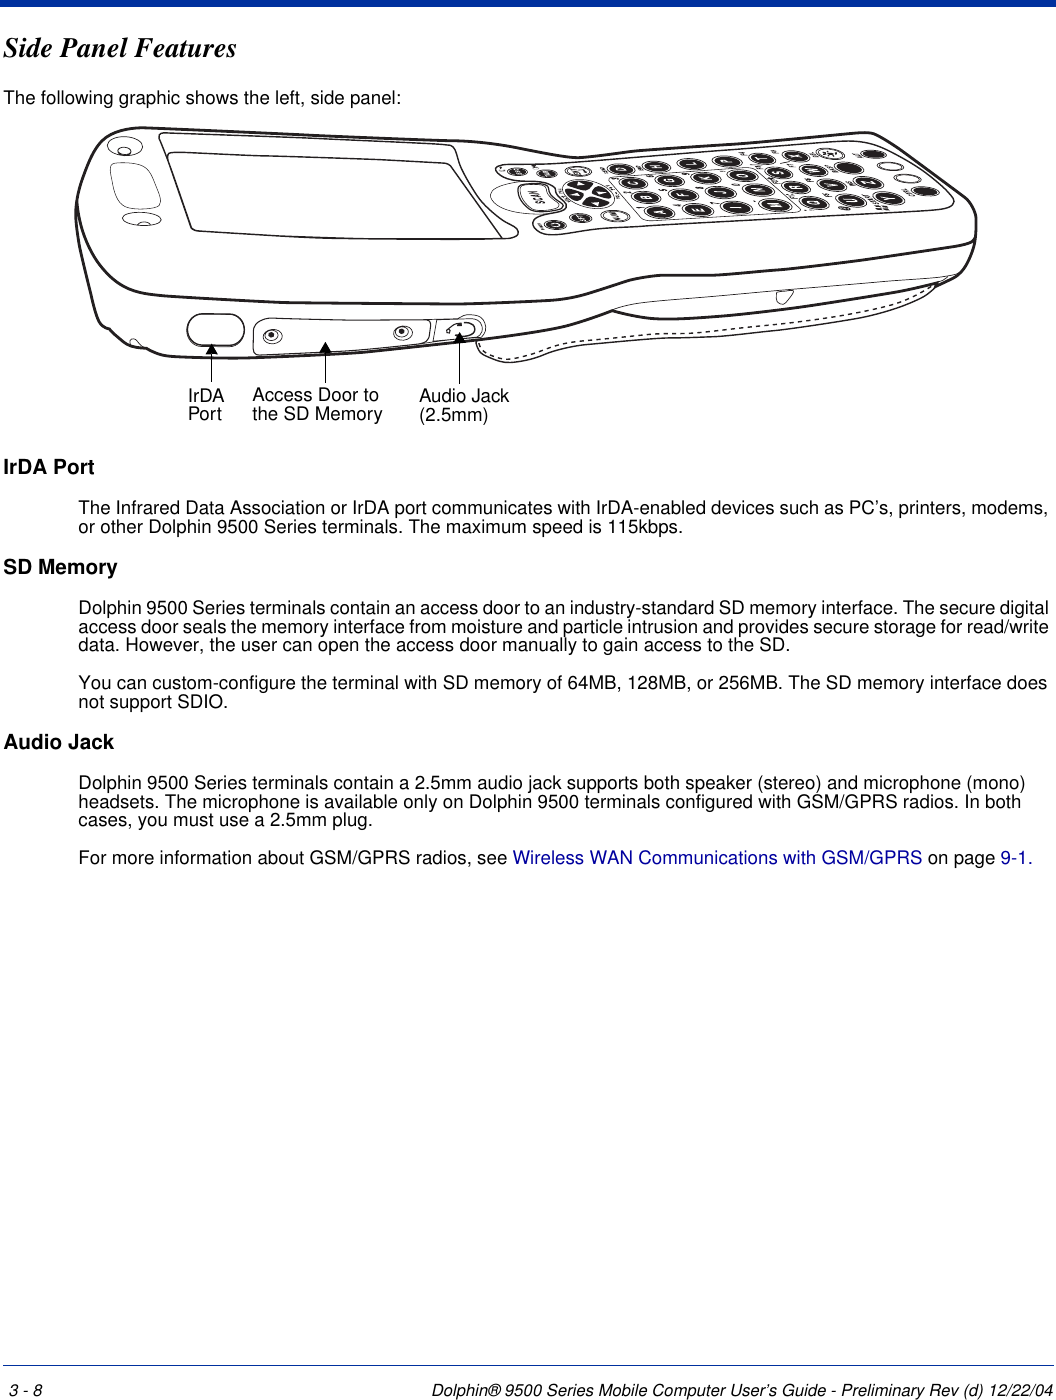 3 - 8 Dolphin® 9500 Series Mobile Computer User’s Guide - Preliminary Rev (d) 12/22/04Side Panel FeaturesThe following graphic shows the left, side panel:IrDA PortThe Infrared Data Association or IrDA port communicates with IrDA-enabled devices such as PC’s, printers, modems, or other Dolphin 9500 Series terminals. The maximum speed is 115kbps.SD MemoryDolphin 9500 Series terminals contain an access door to an industry-standard SD memory interface. The secure digital access door seals the memory interface from moisture and particle intrusion and provides secure storage for read/write data. However, the user can open the access door manually to gain access to the SD.You can custom-configure the terminal with SD memory of 64MB, 128MB, or 256MB. The SD memory interface does not support SDIO.Audio JackDolphin 9500 Series terminals contain a 2.5mm audio jack supports both speaker (stereo) and microphone (mono) headsets. The microphone is available only on Dolphin 9500 terminals configured with GSM/GPRS radios. In both cases, you must use a 2.5mm plug.For more information about GSM/GPRS radios, see Wireless WAN Communications with GSM/GPRS on page 9-1.IrDA Port Audio Jack (2.5mm)Access Door to the SD Memory